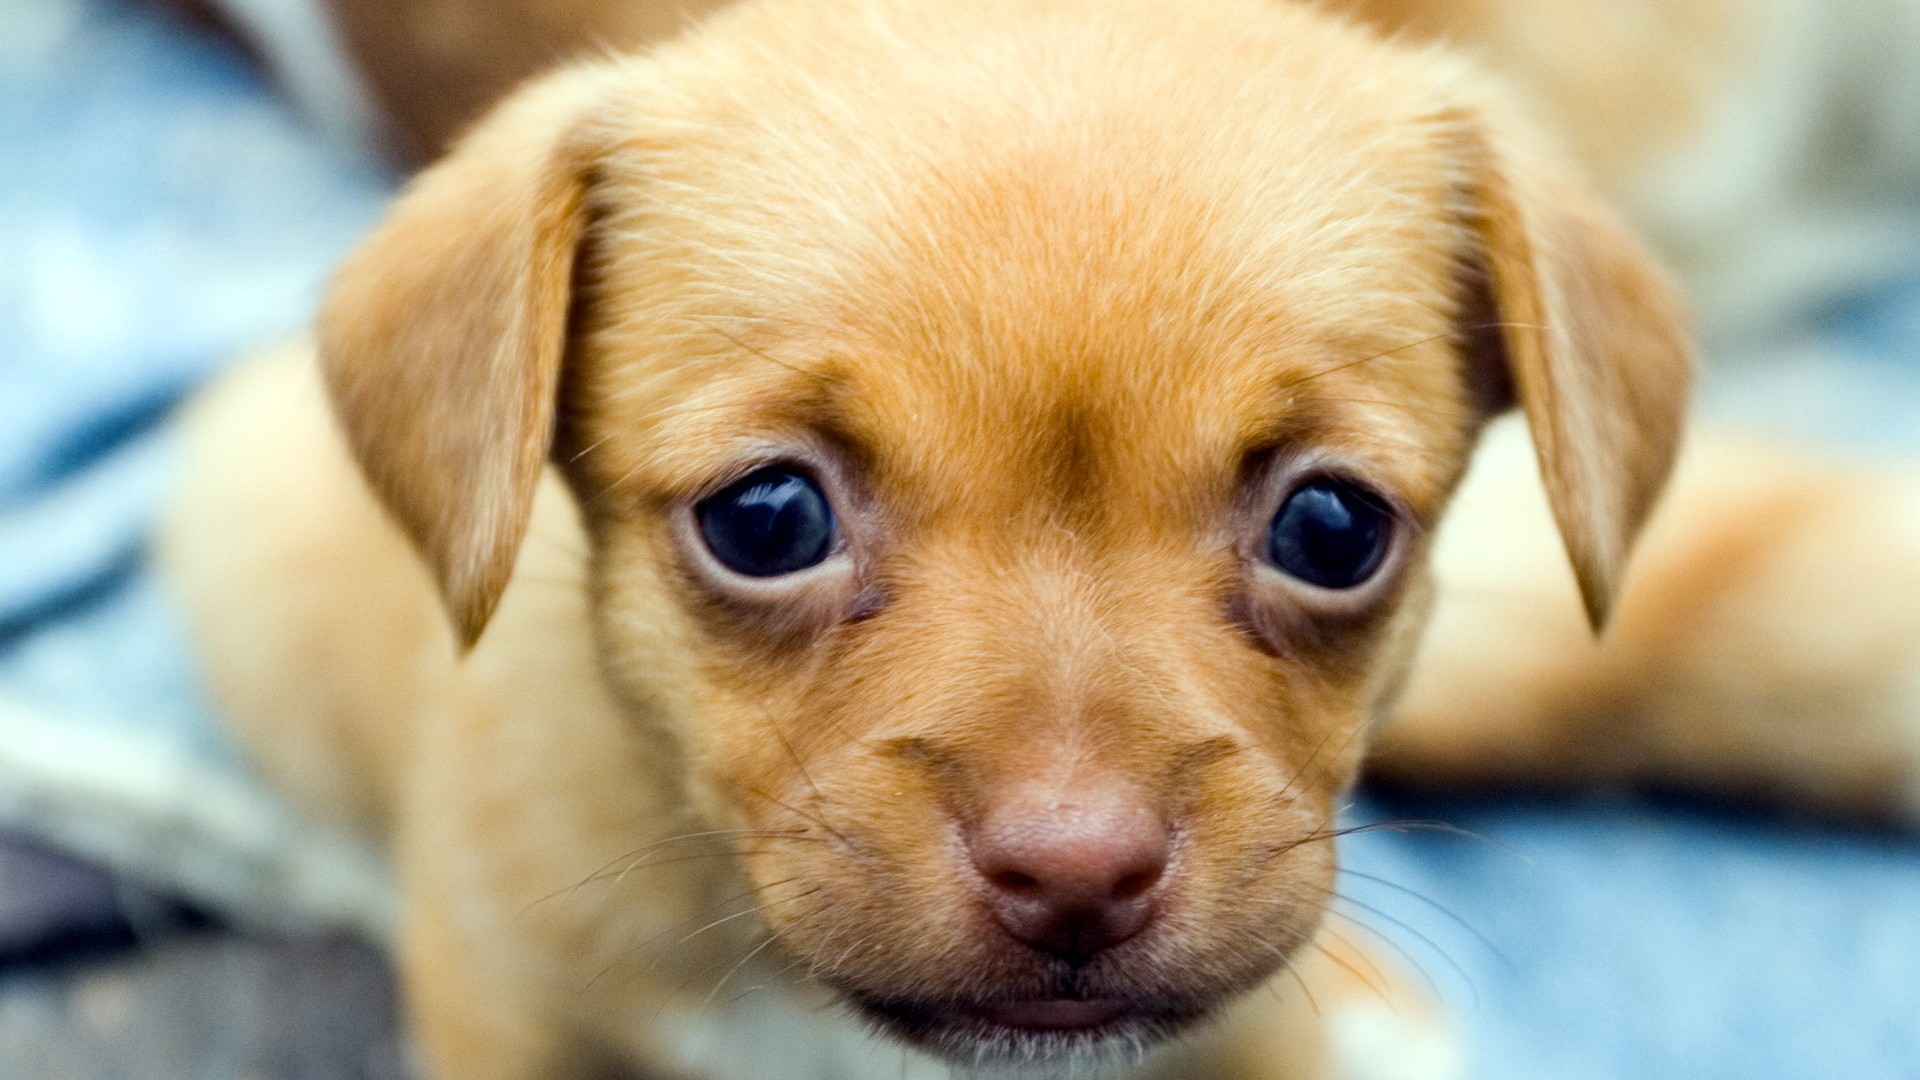 Wallpaper HD Puppy With Resolution 1920X1080